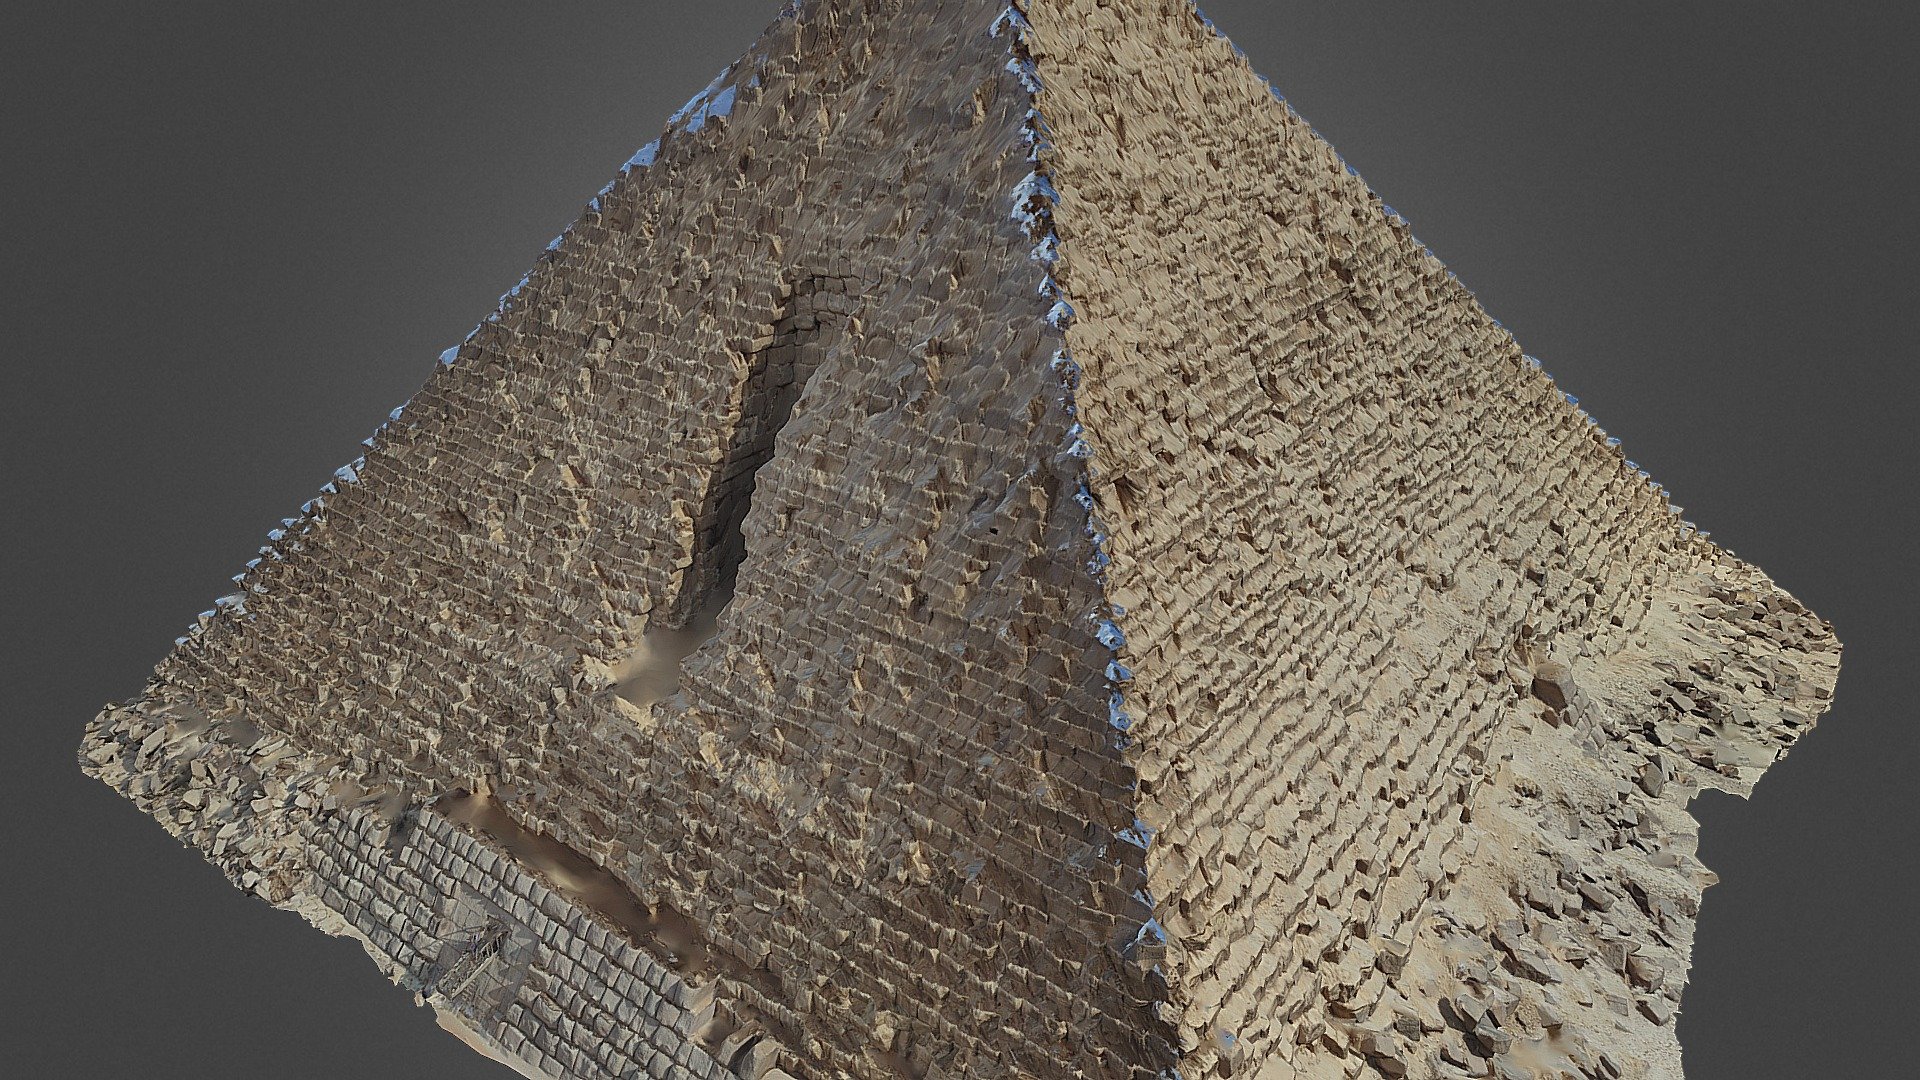 Pyramid of Menkaure, Giza pyramid complex.
Located on the Giza Plateau in the southwestern outskirts of Cairo, Egypt.

Captured on Realme XT (16 MP) while walking through pyramid's perimeter 3d model